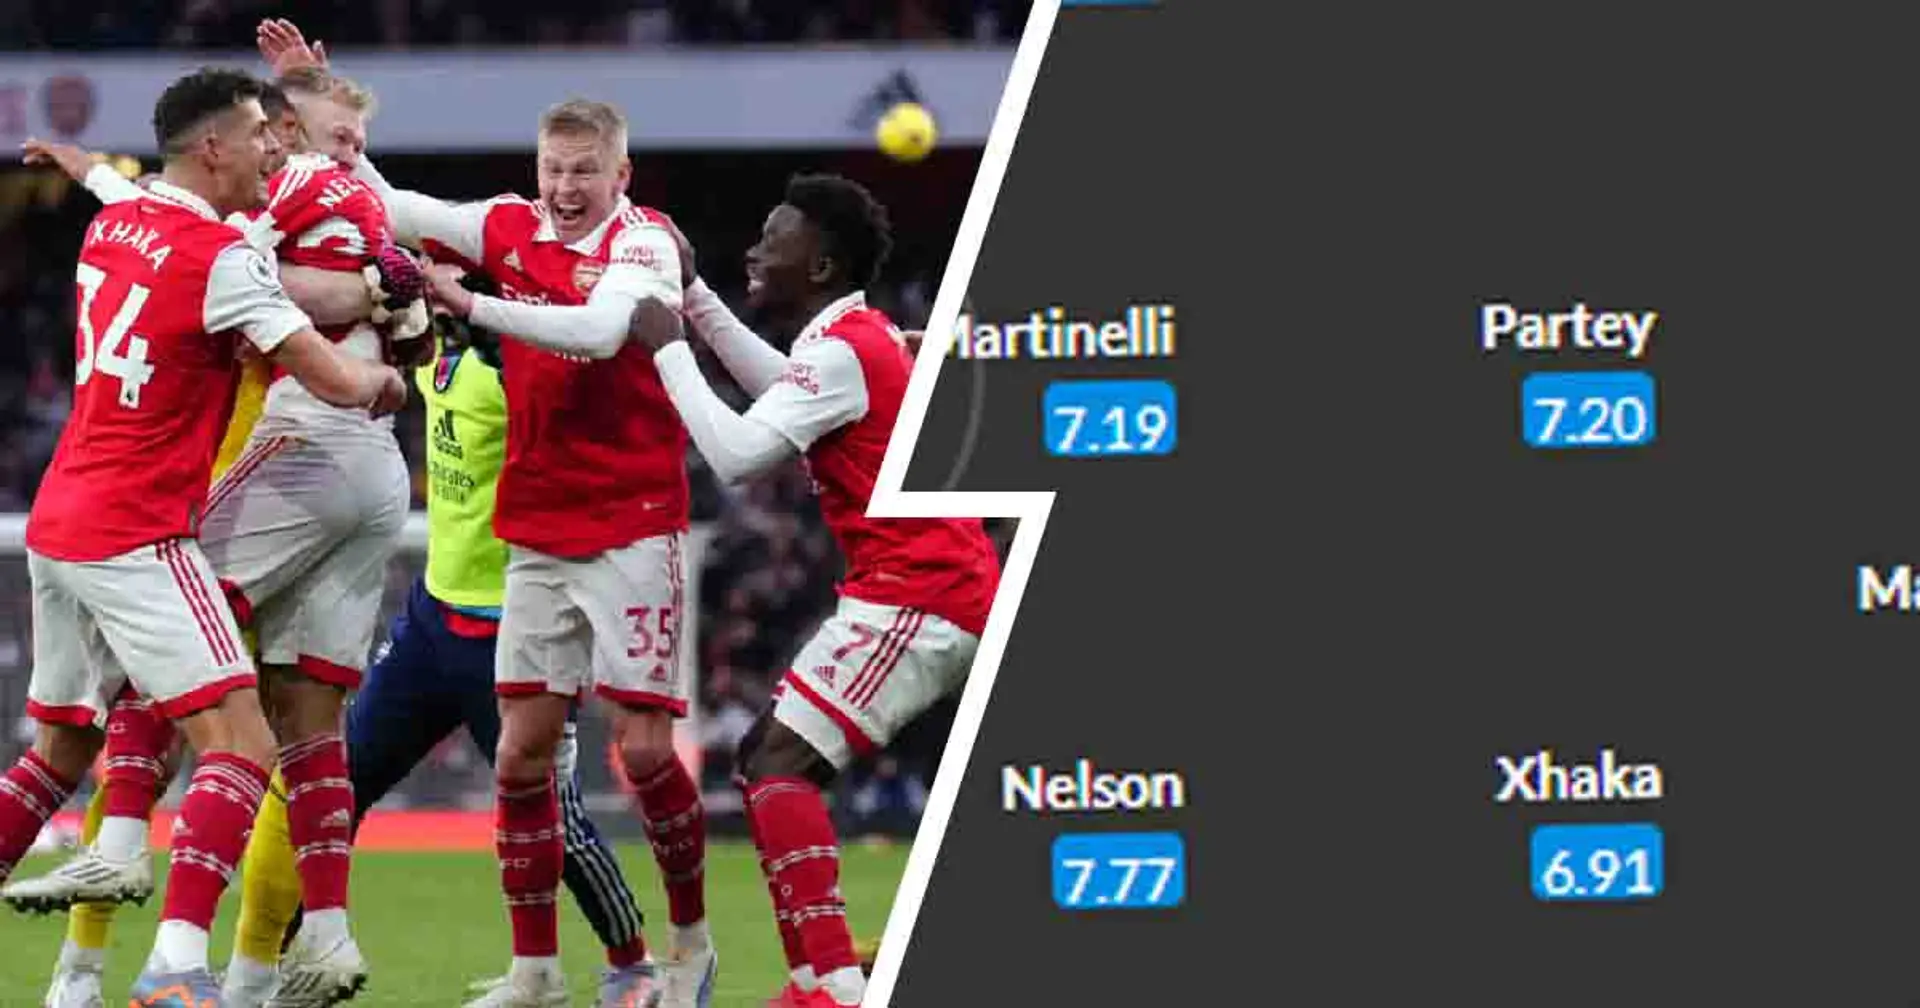 Nelson to start: Team news and probable XIs for Fulham vs Arsenal